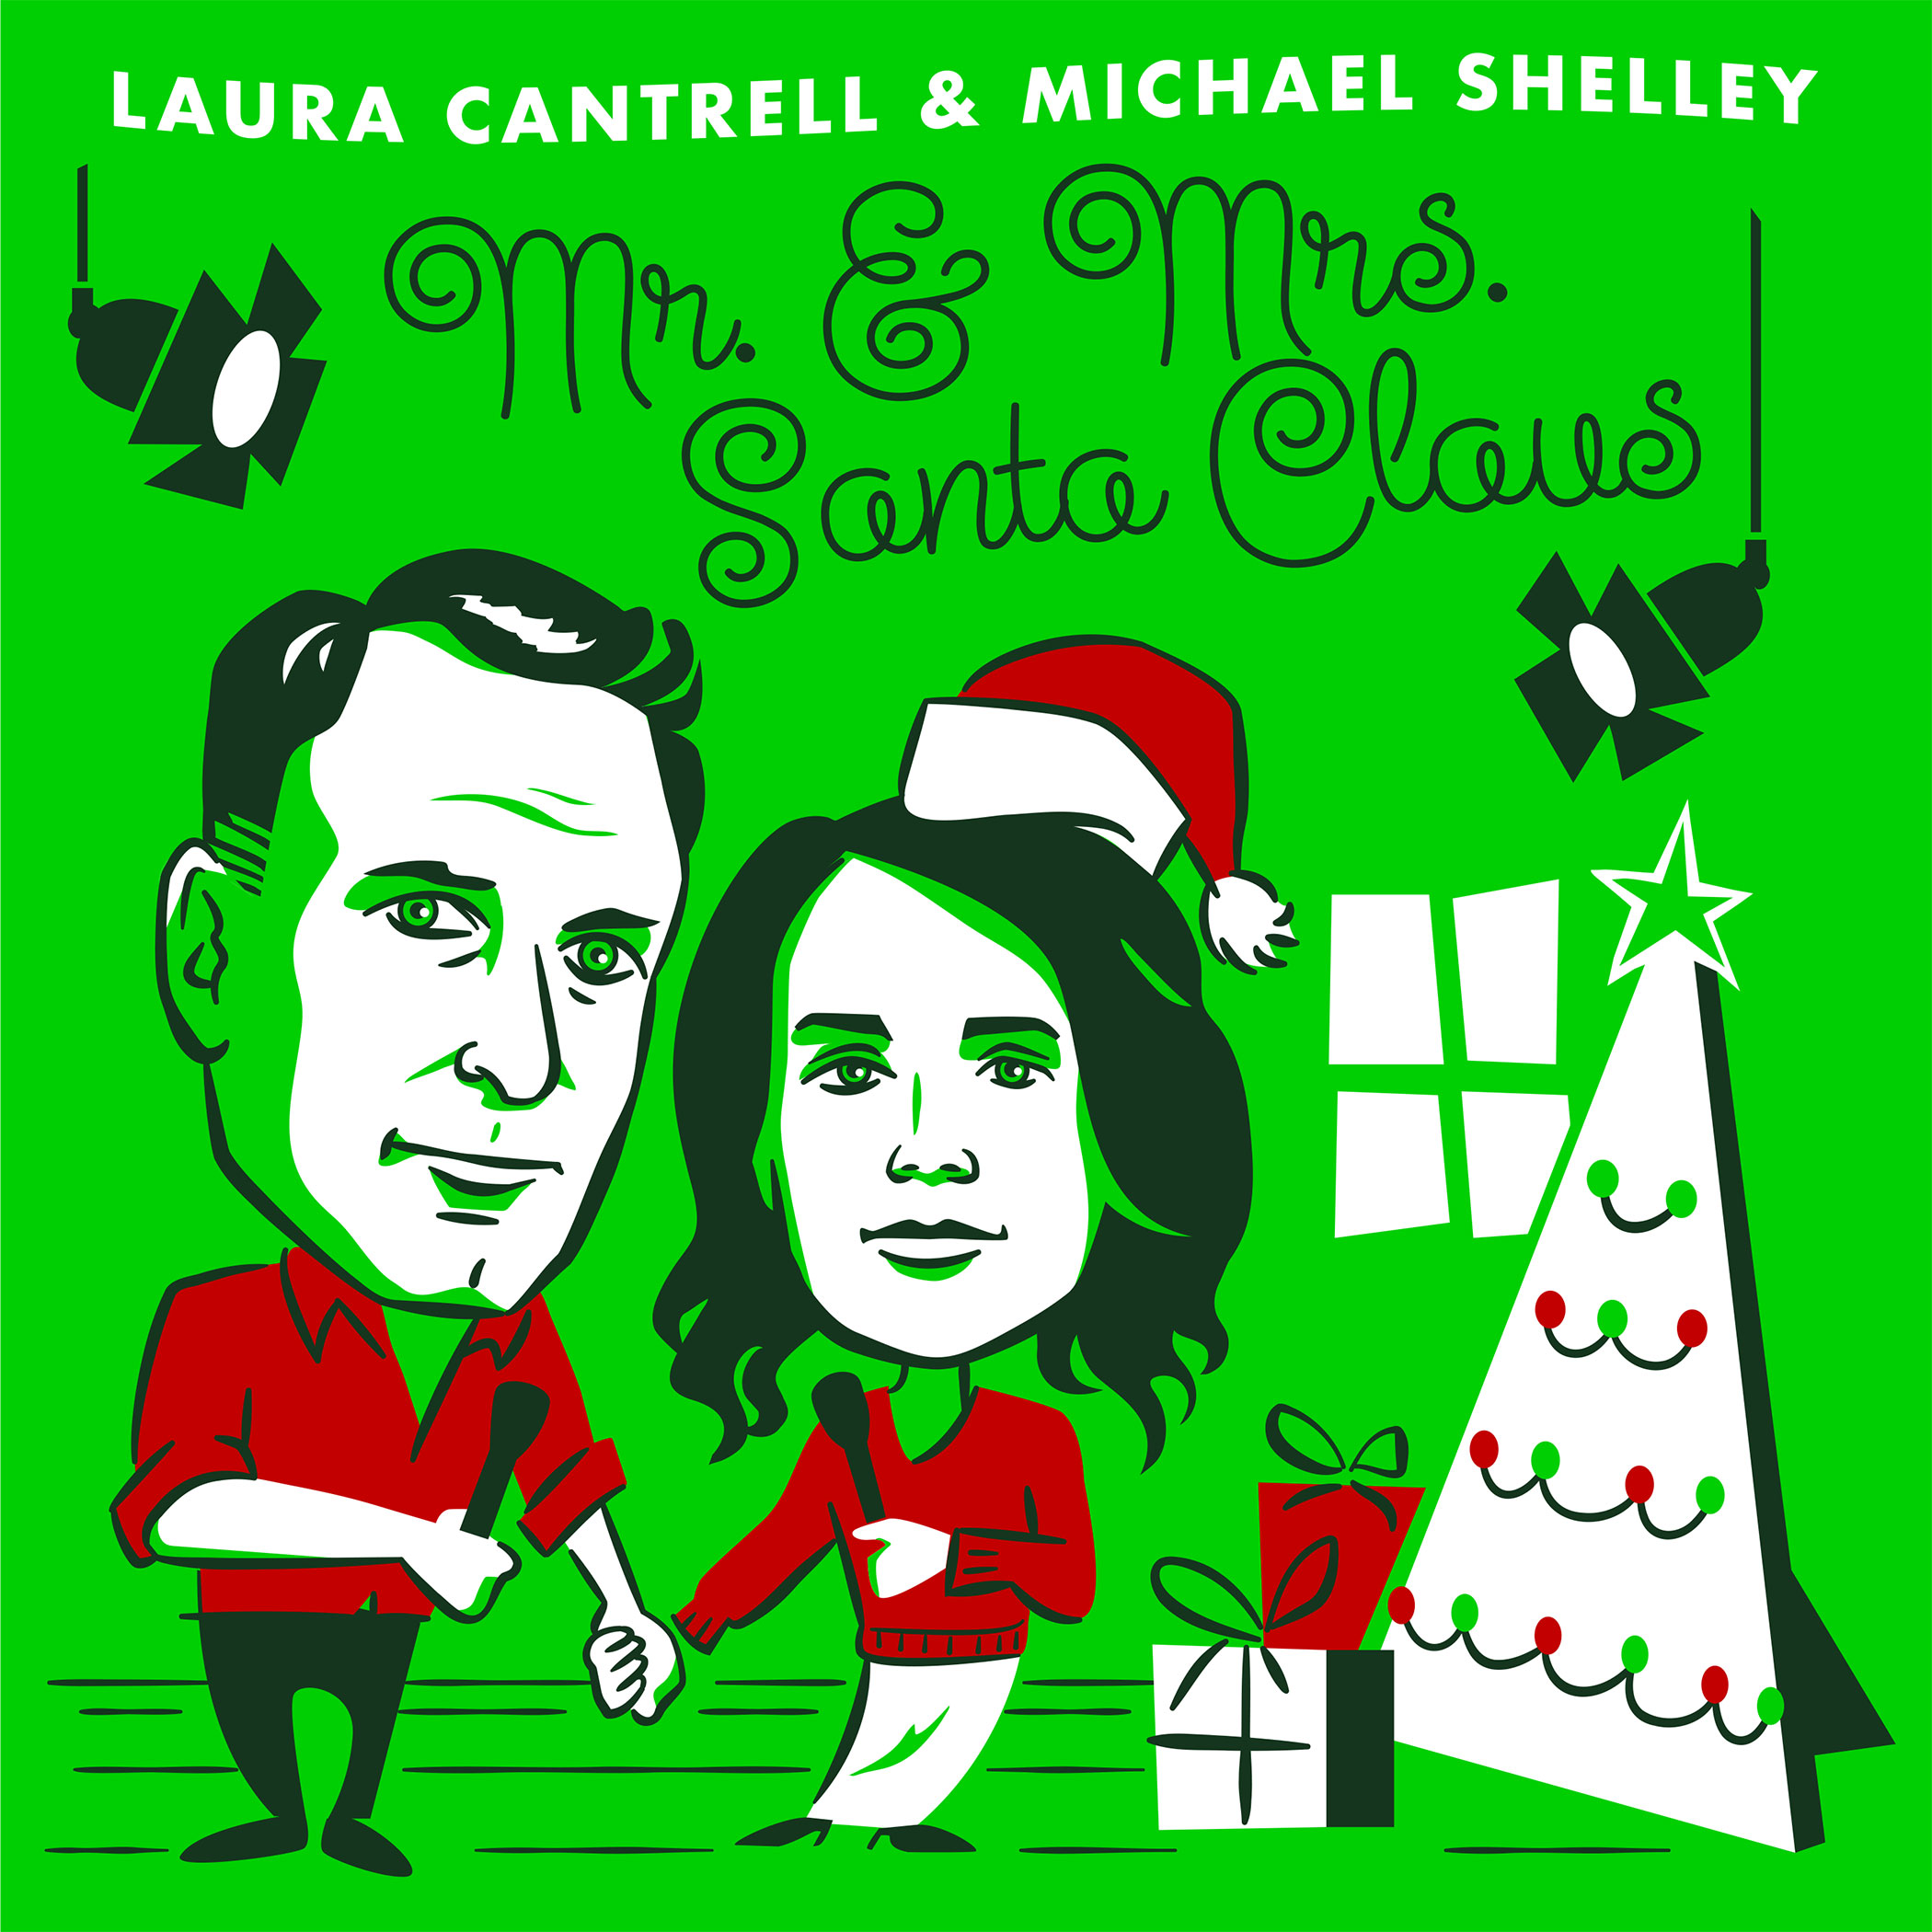 Laura Cantrell & Michael Shelley